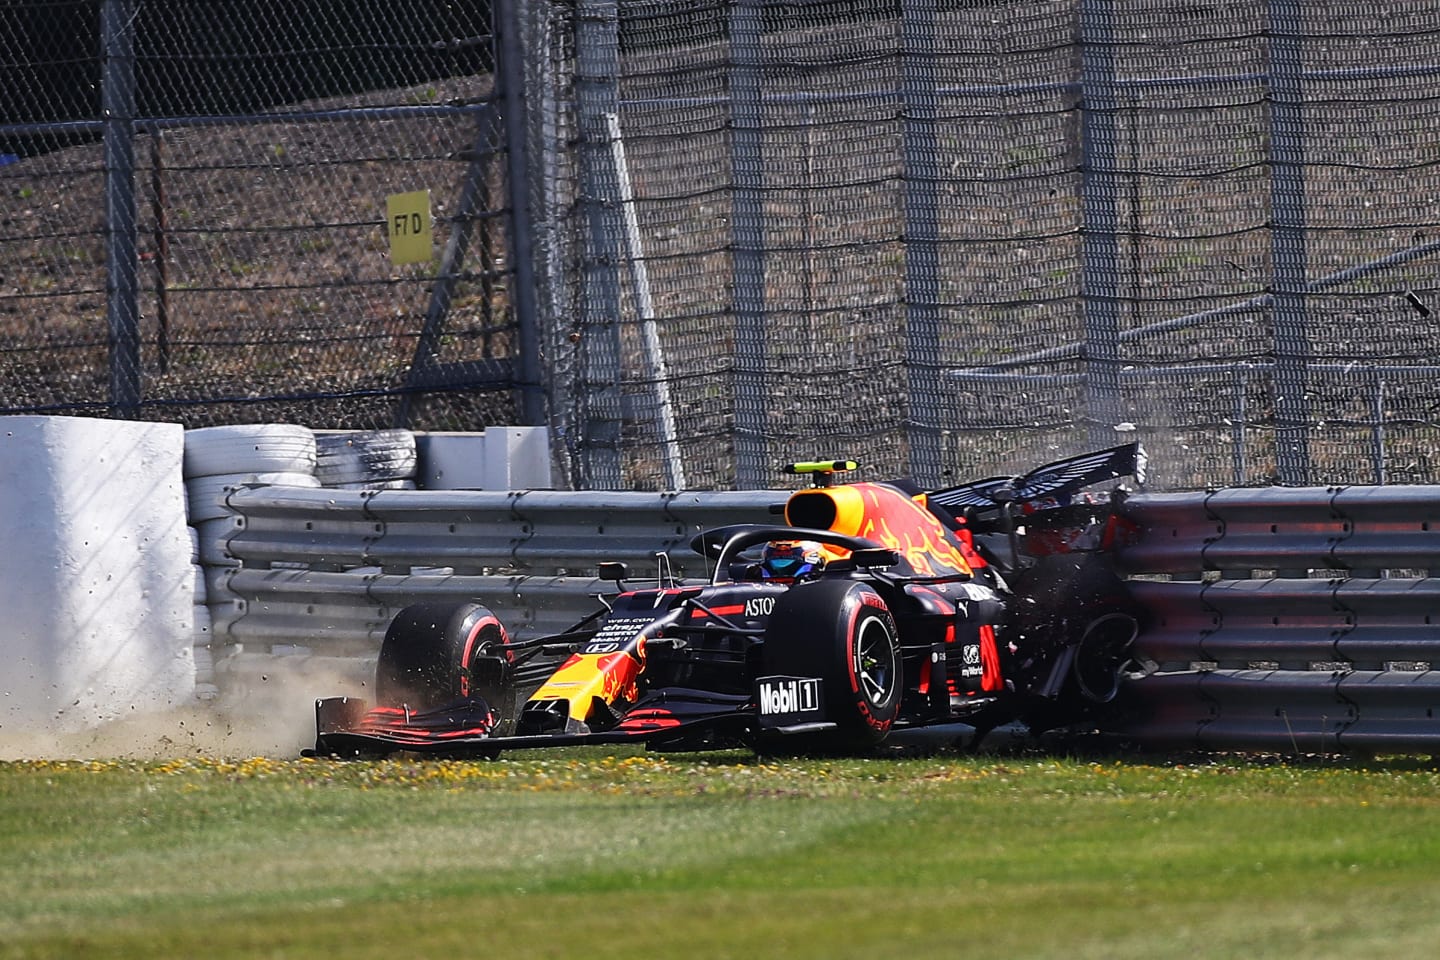 NORTHAMPTON, ENGLAND - JULY 31: Alexander Albon of Thailand driving the (23) Aston Martin Red Bull Racing RB16 crashes into a track barrier during practice for the F1 Grand Prix of Great Britain at Silverstone on July 31, 2020 in Northampton, England. (Photo by Bryn Lennon/Getty Images)